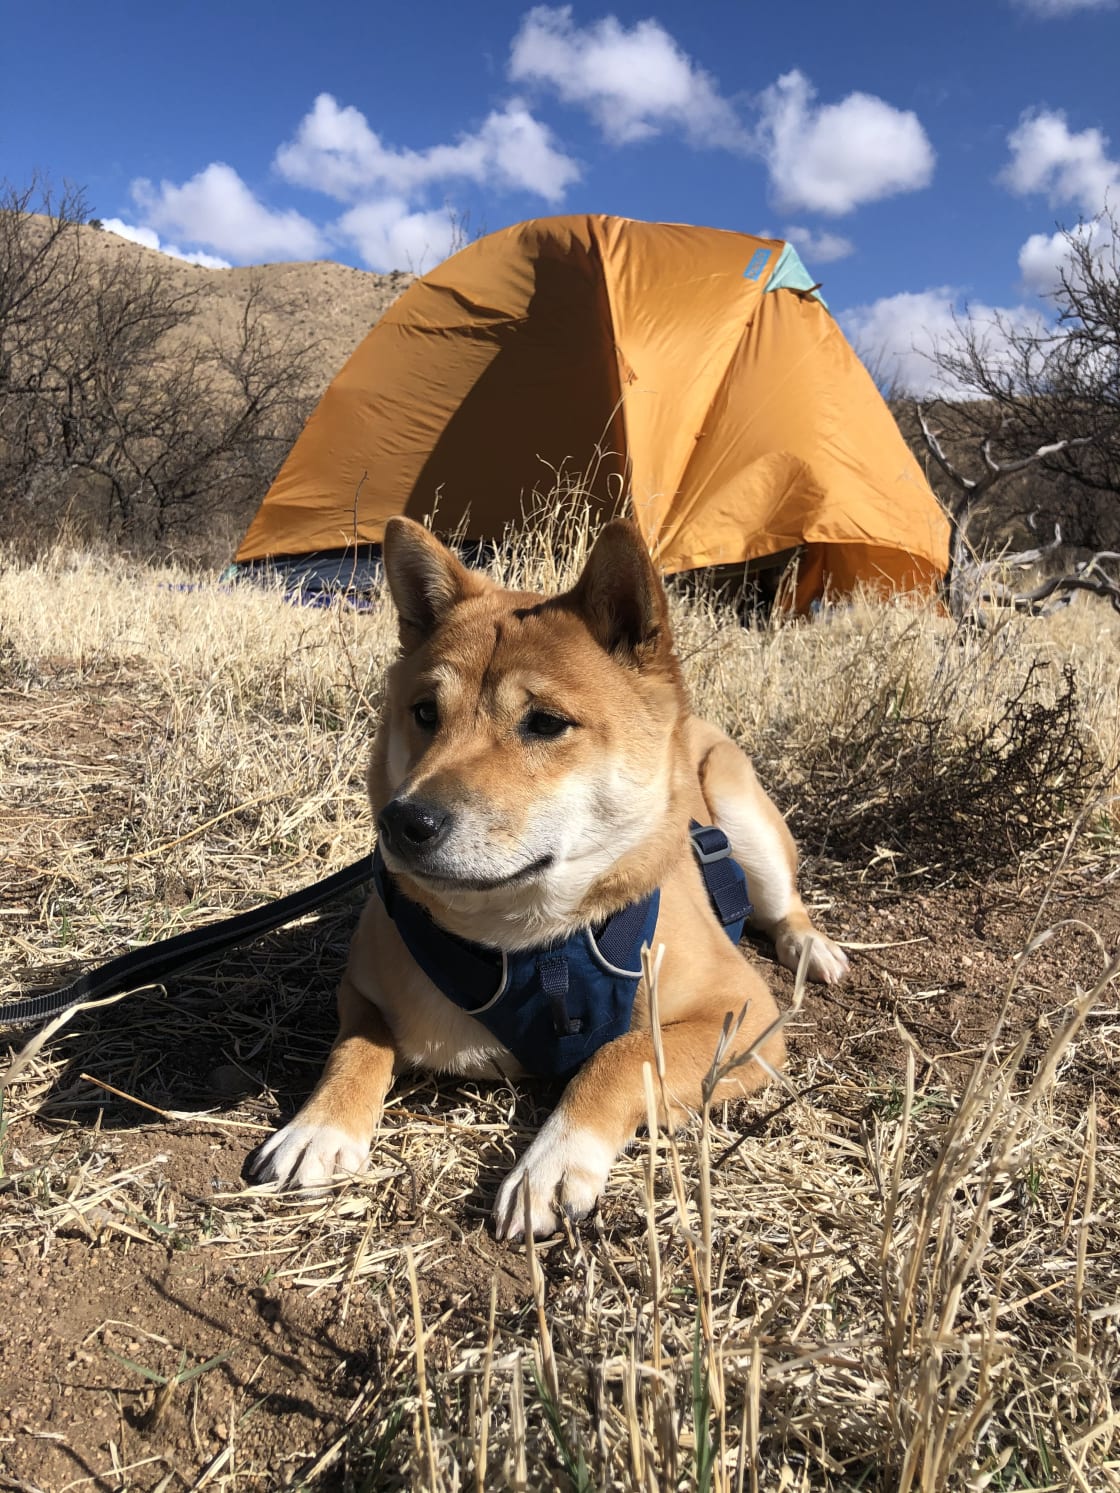 We were allowed to bring our dog camping 